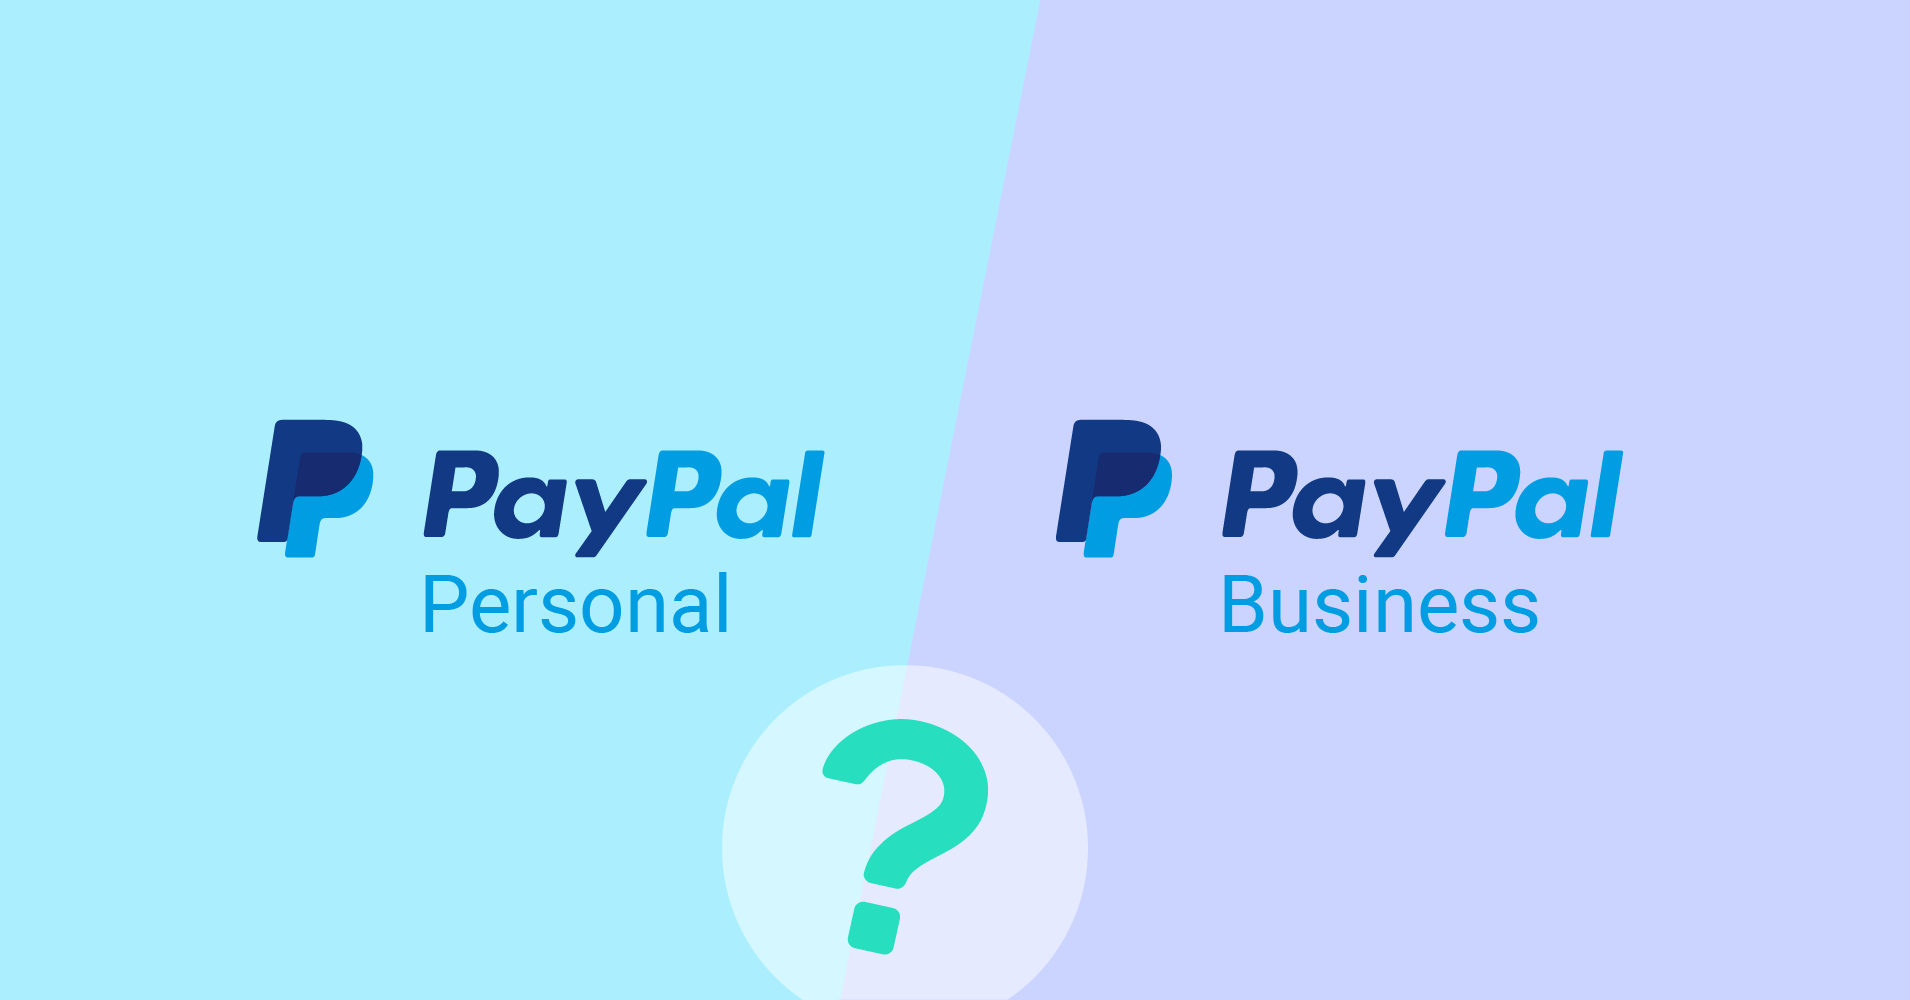 Which Version of PayPal should I Use?